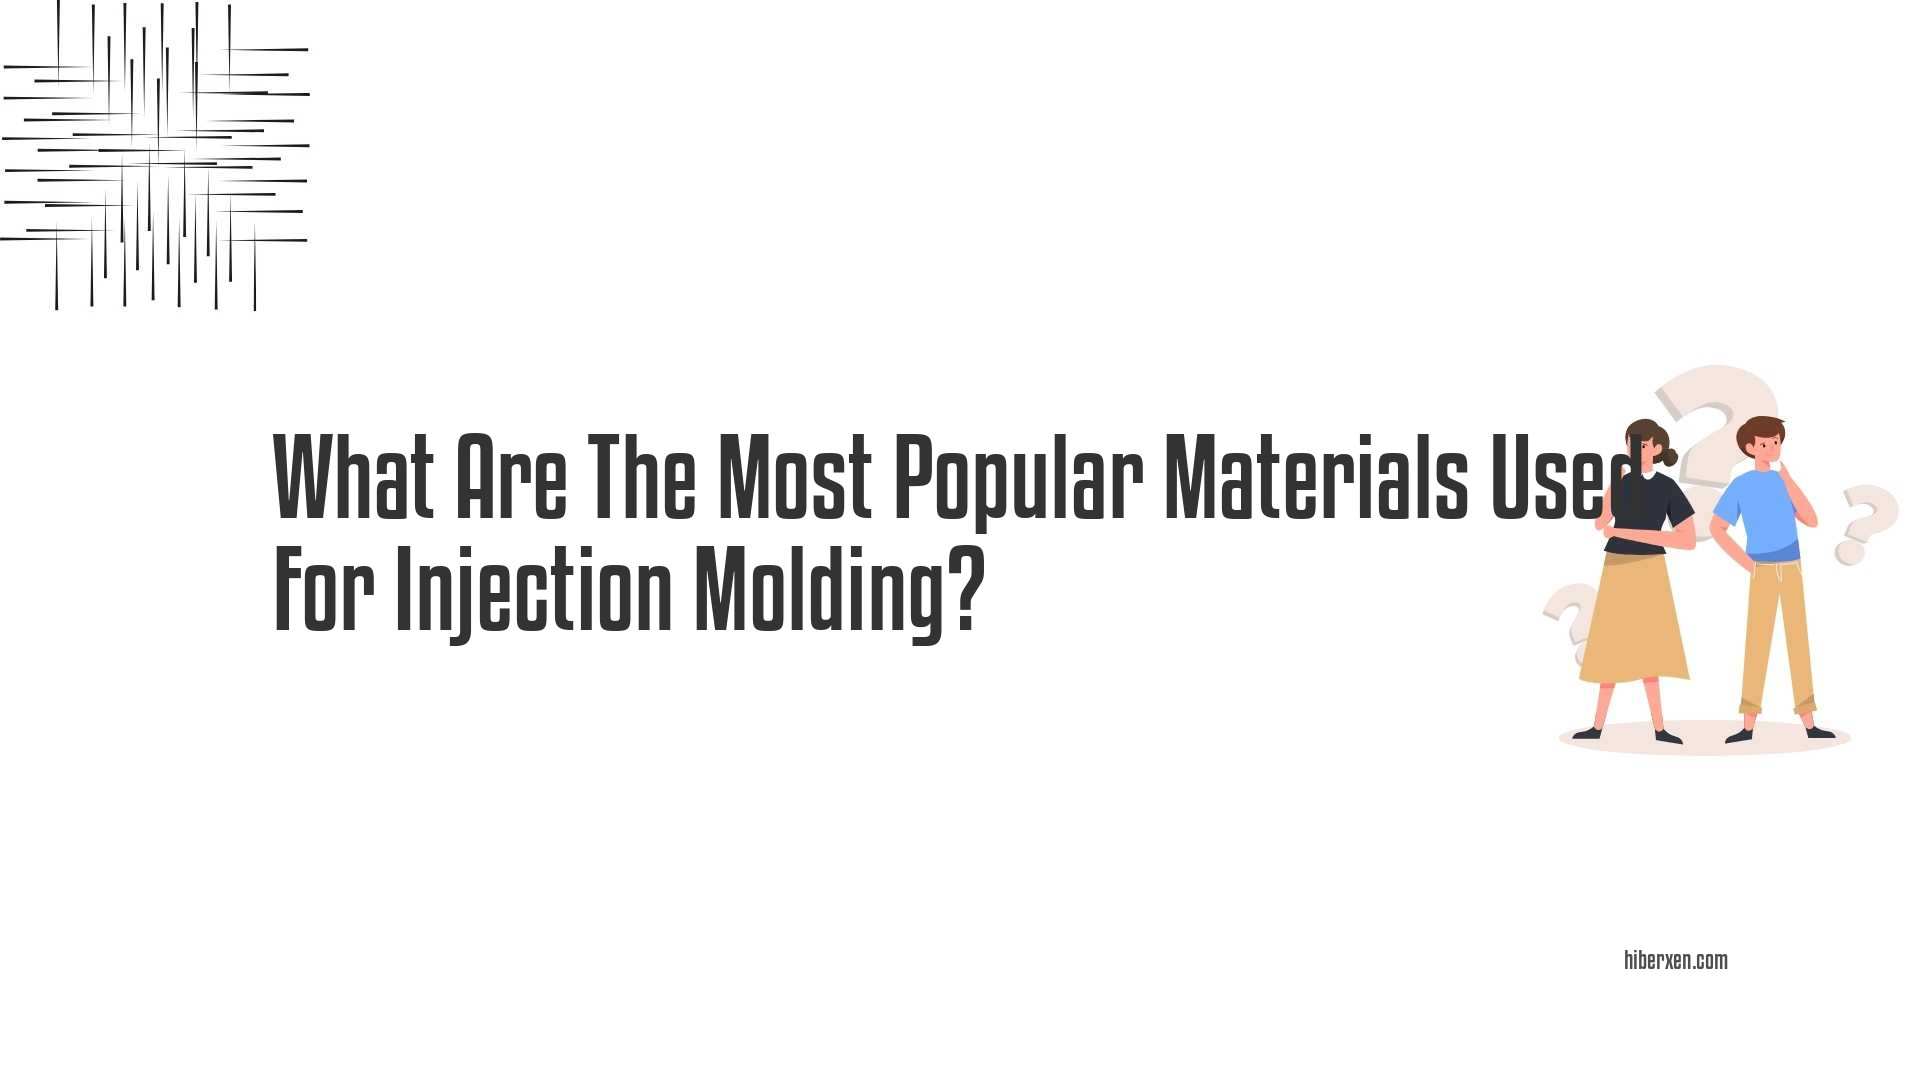 What Are The Most Popular Materials Used For Injection Molding?